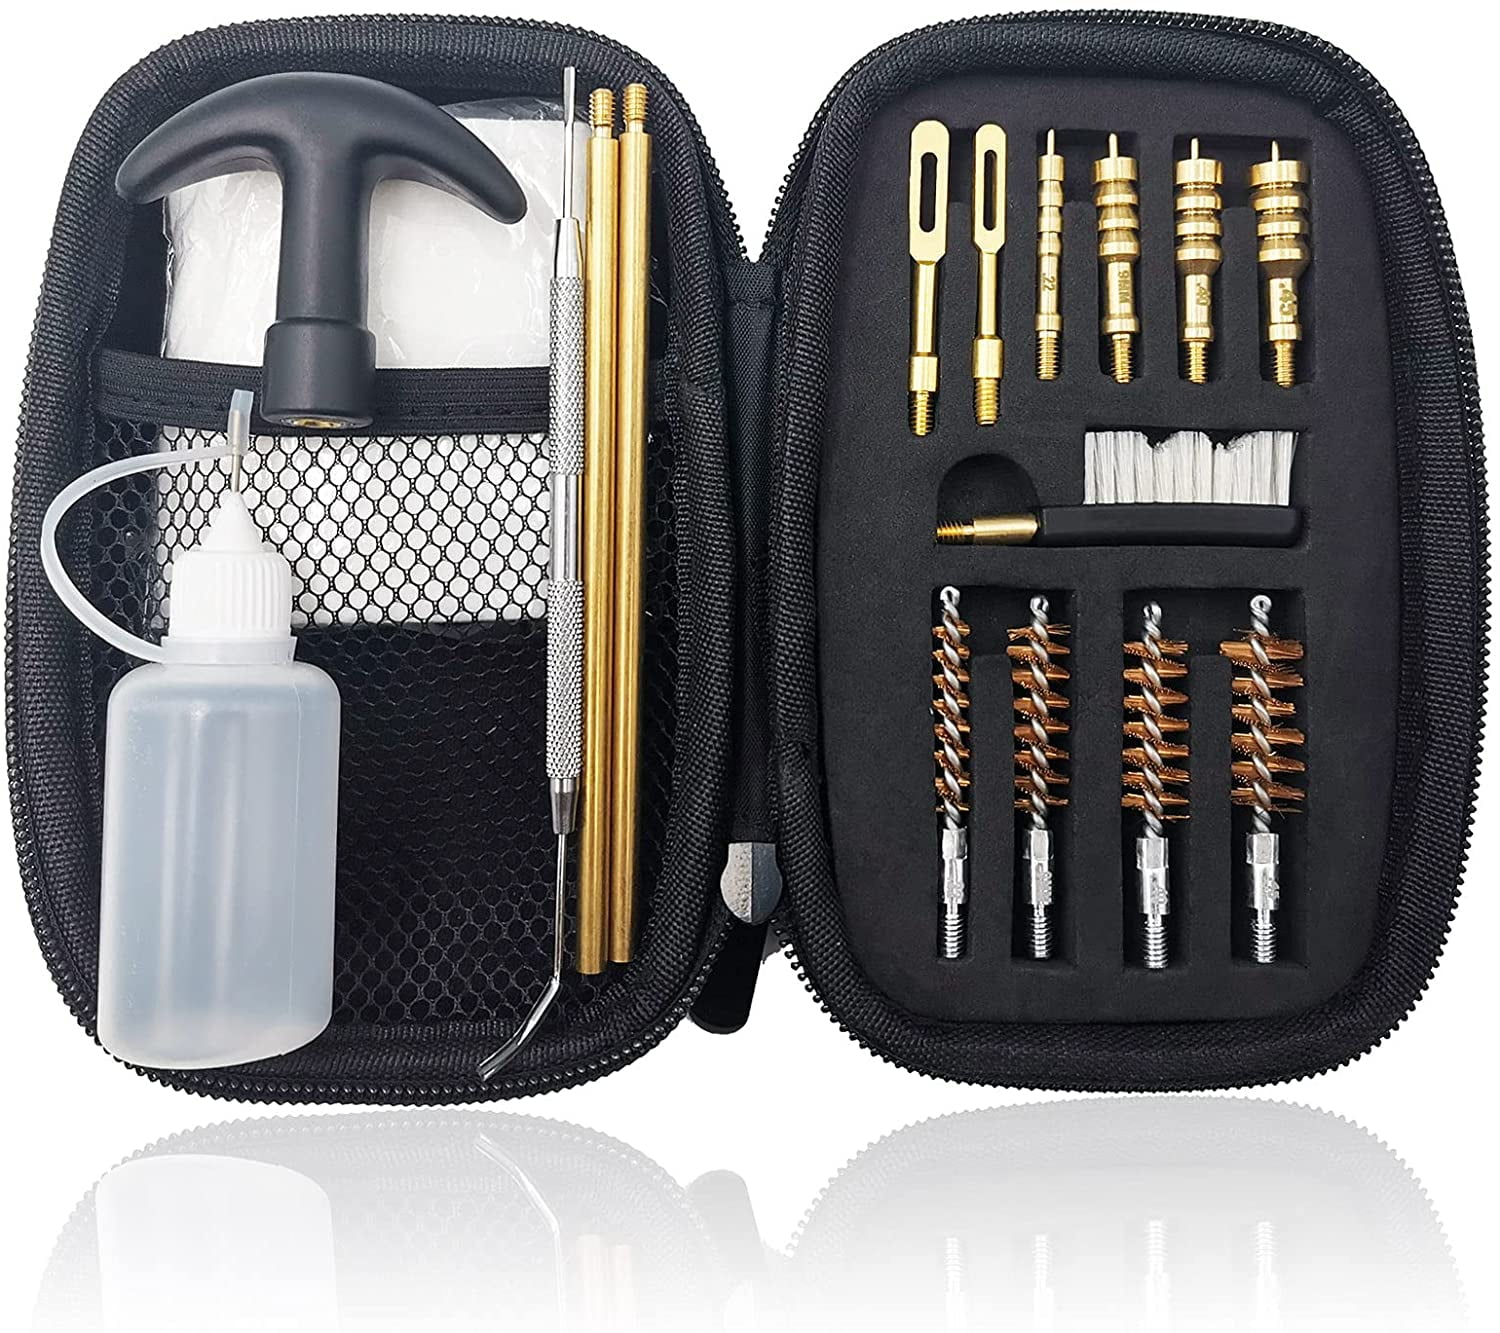 Universal Pistol Cleaning Set Carrying Case For 22 357 38 40 45 9mm Hand Guns 